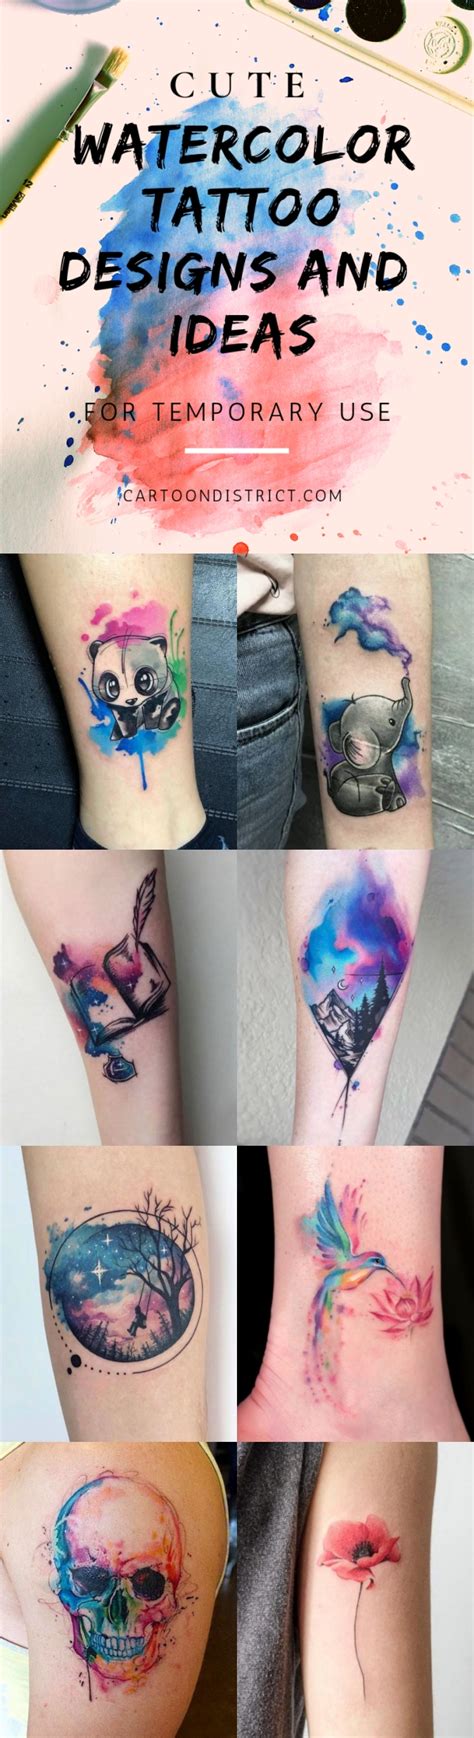 40 Cute Watercolor Tattoo Designs And Ideas For Temporary